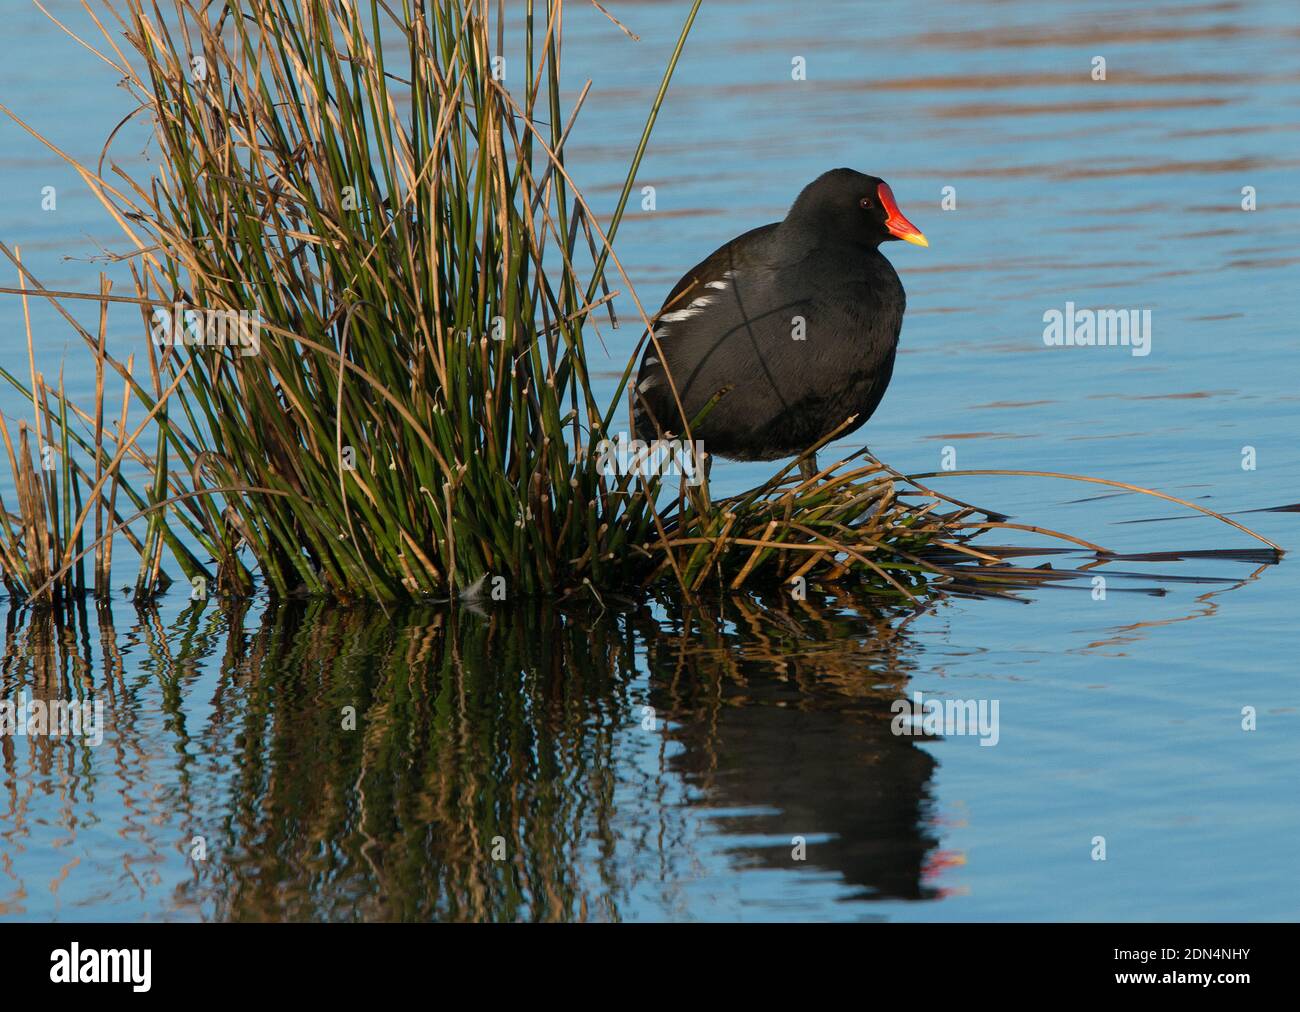 Moorhen standing on reeds growing in a lake, caught by the sun with the light highlighting the scarlet and yellow tip of the beak and dark plumage Stock Photo